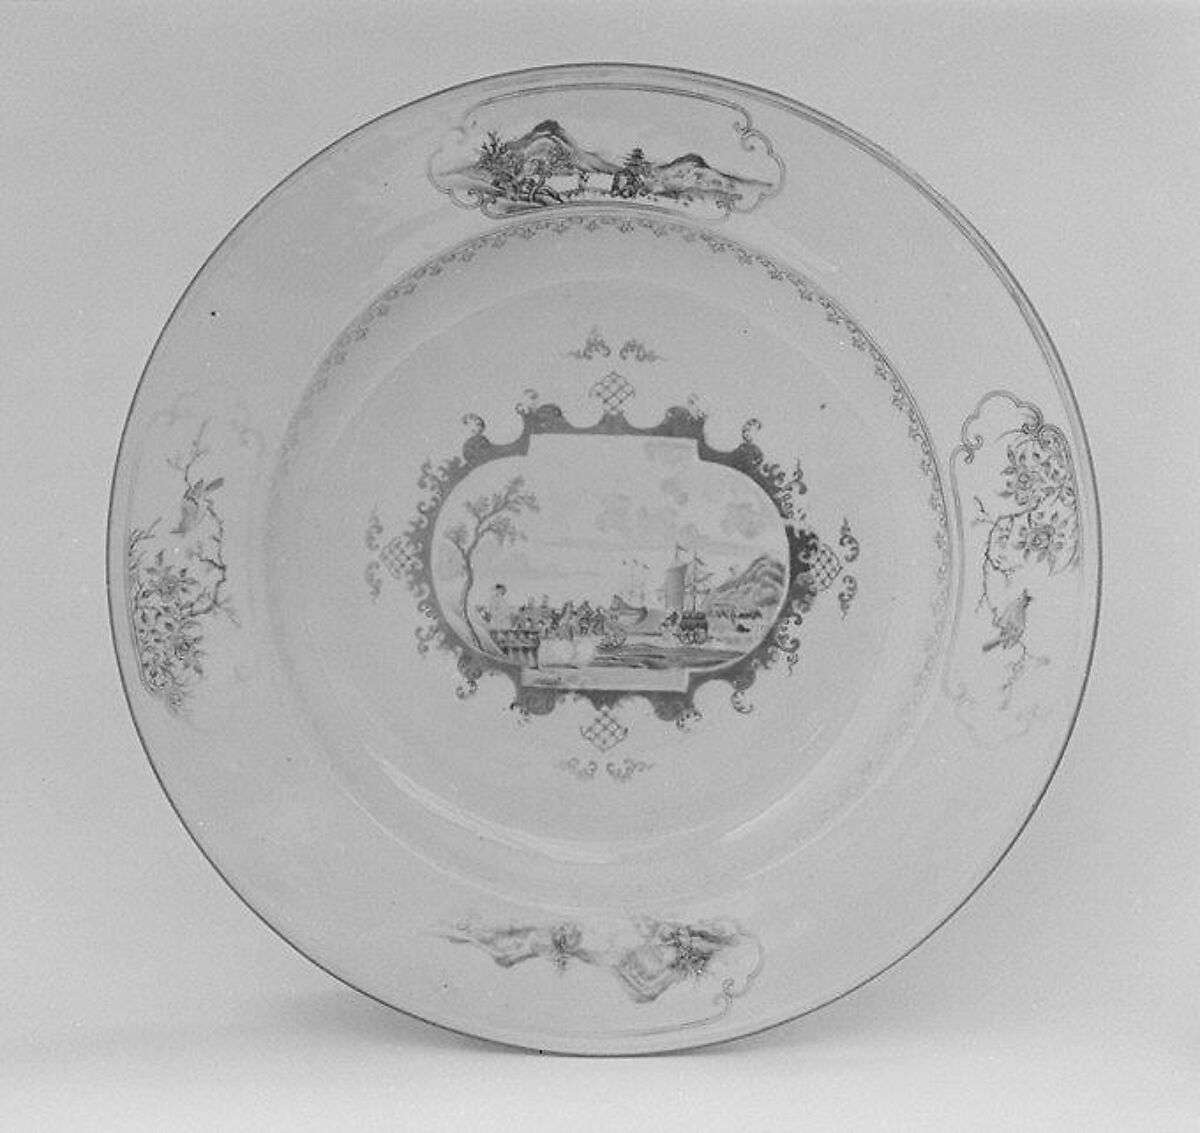 Platter (part of a service), Hard-paste porcelain, Chinese, for Continental European, possibly Danish, market 